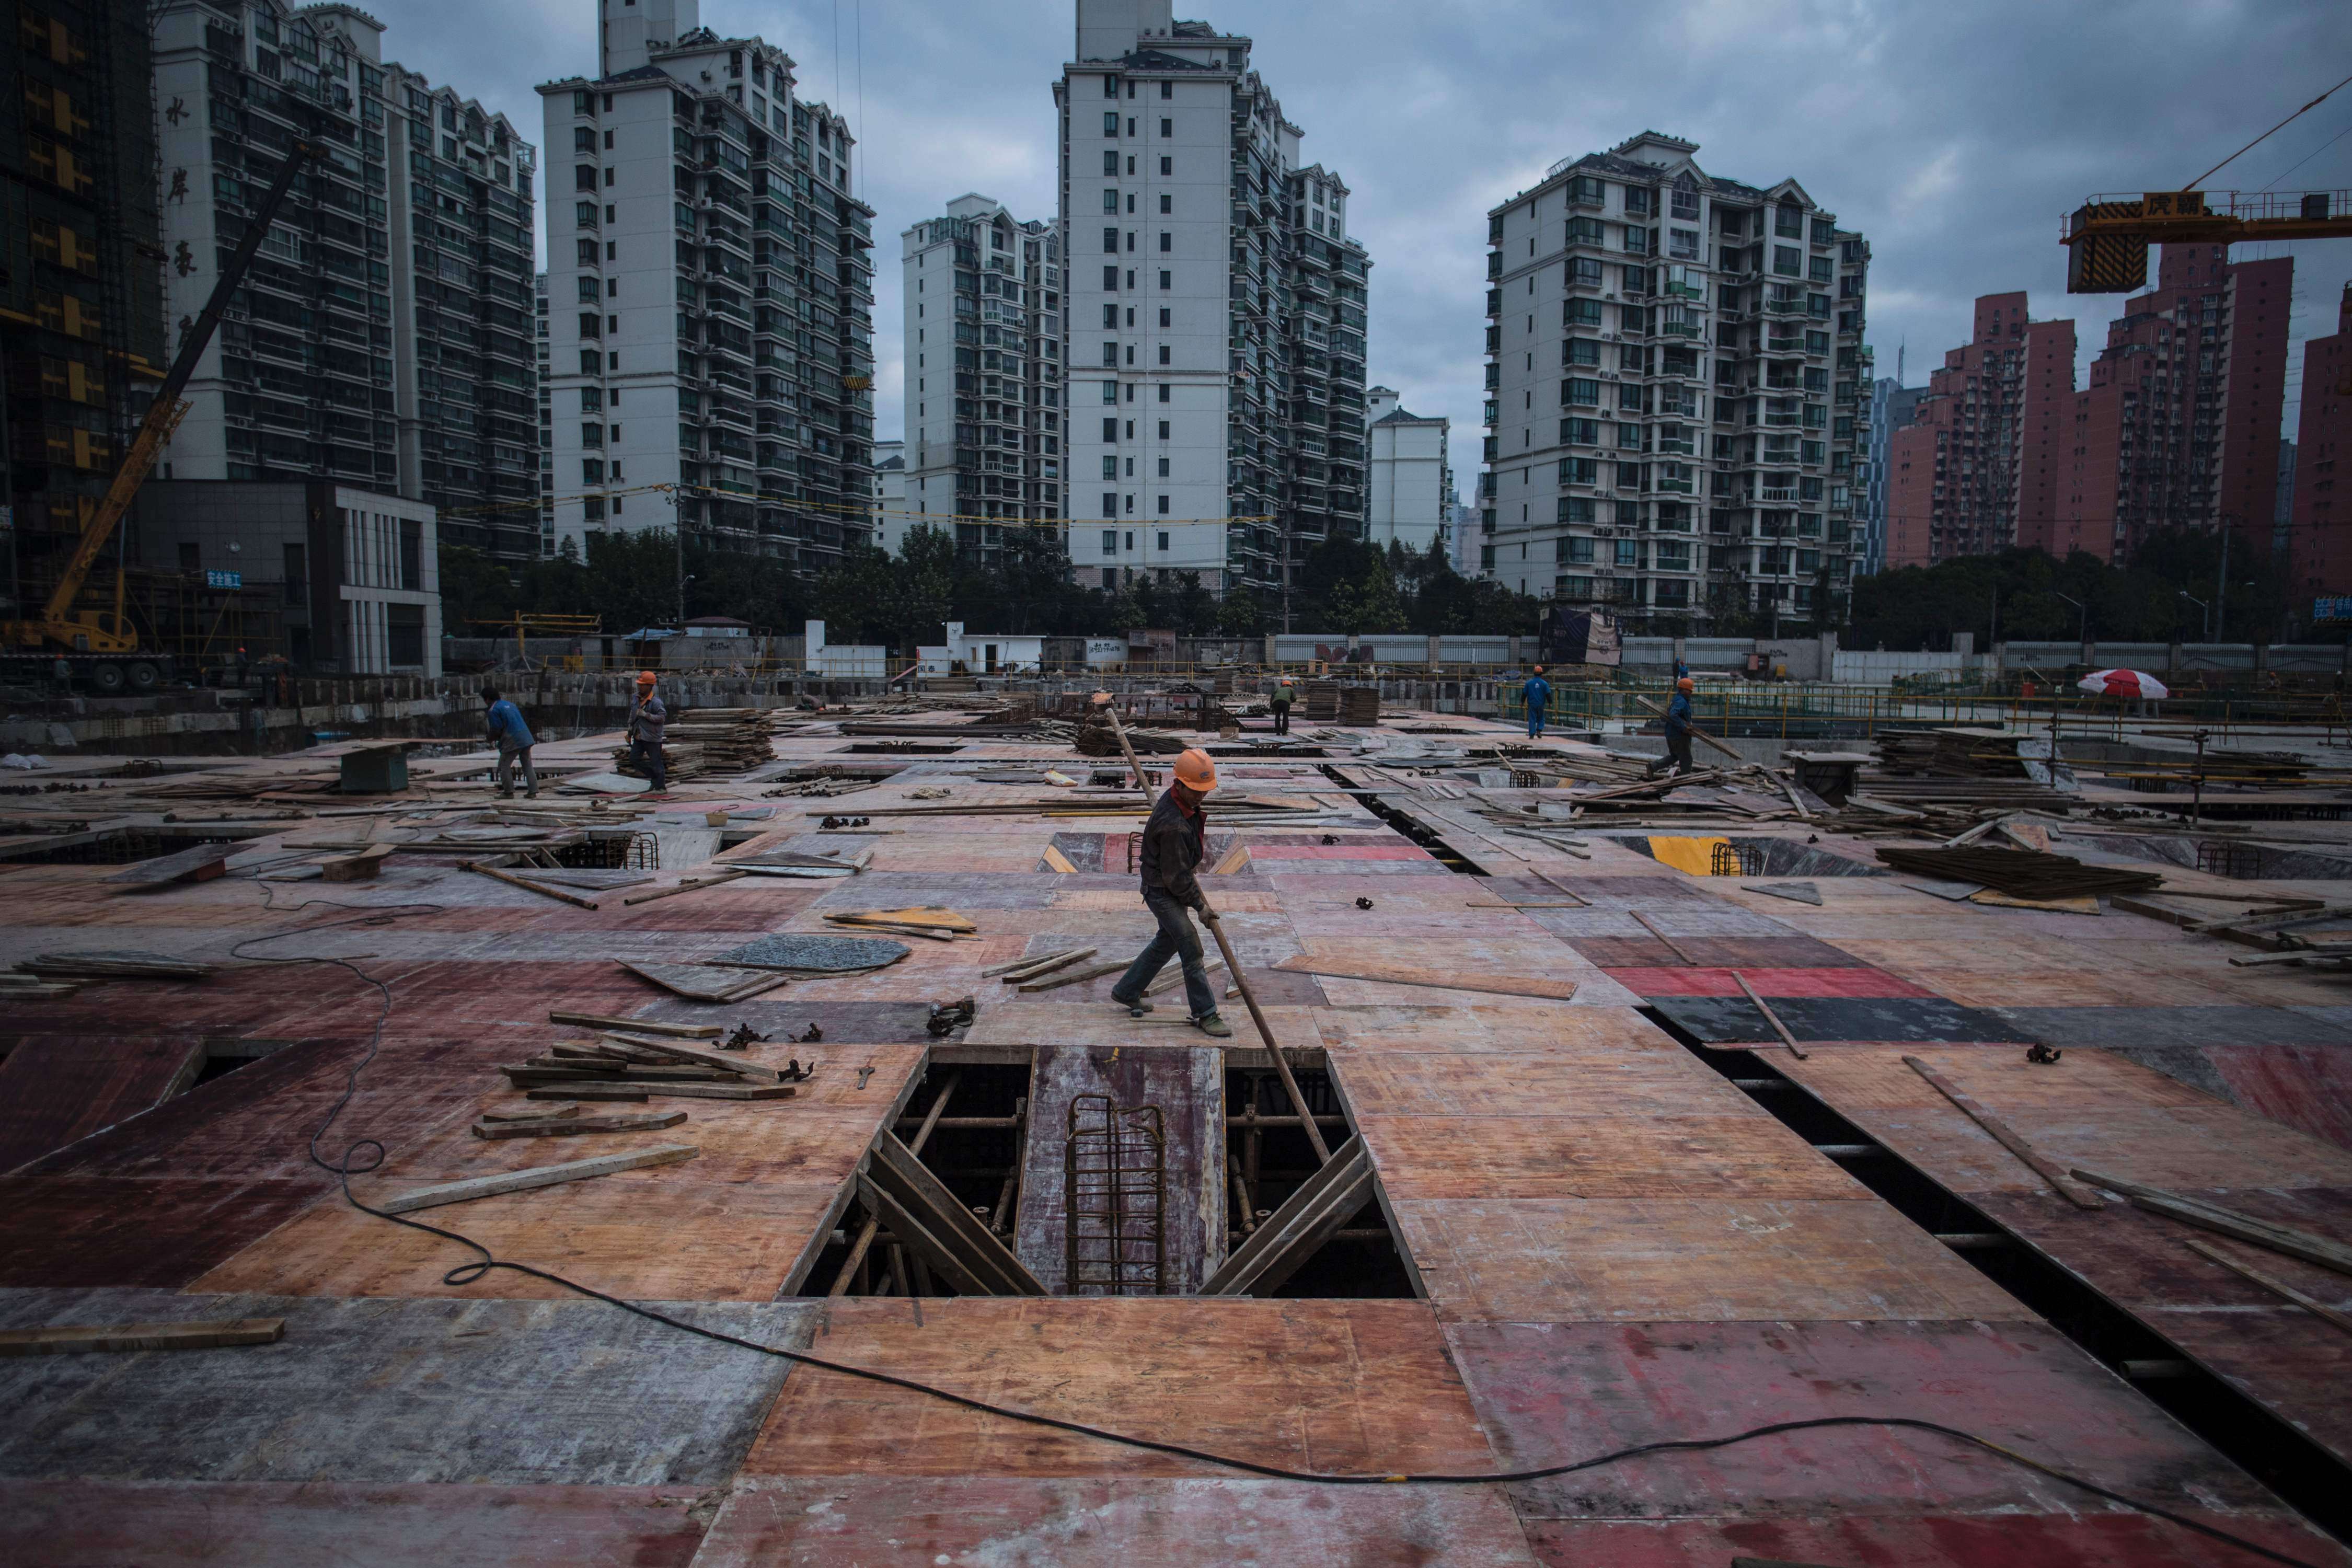 Men work at a construction site for a residential skyscraper in Shanghai. Urban development patterns should encourage good neighbourliness between the rich and poor, fostering camaraderie rather than promoting class hatred. Photo: AFP